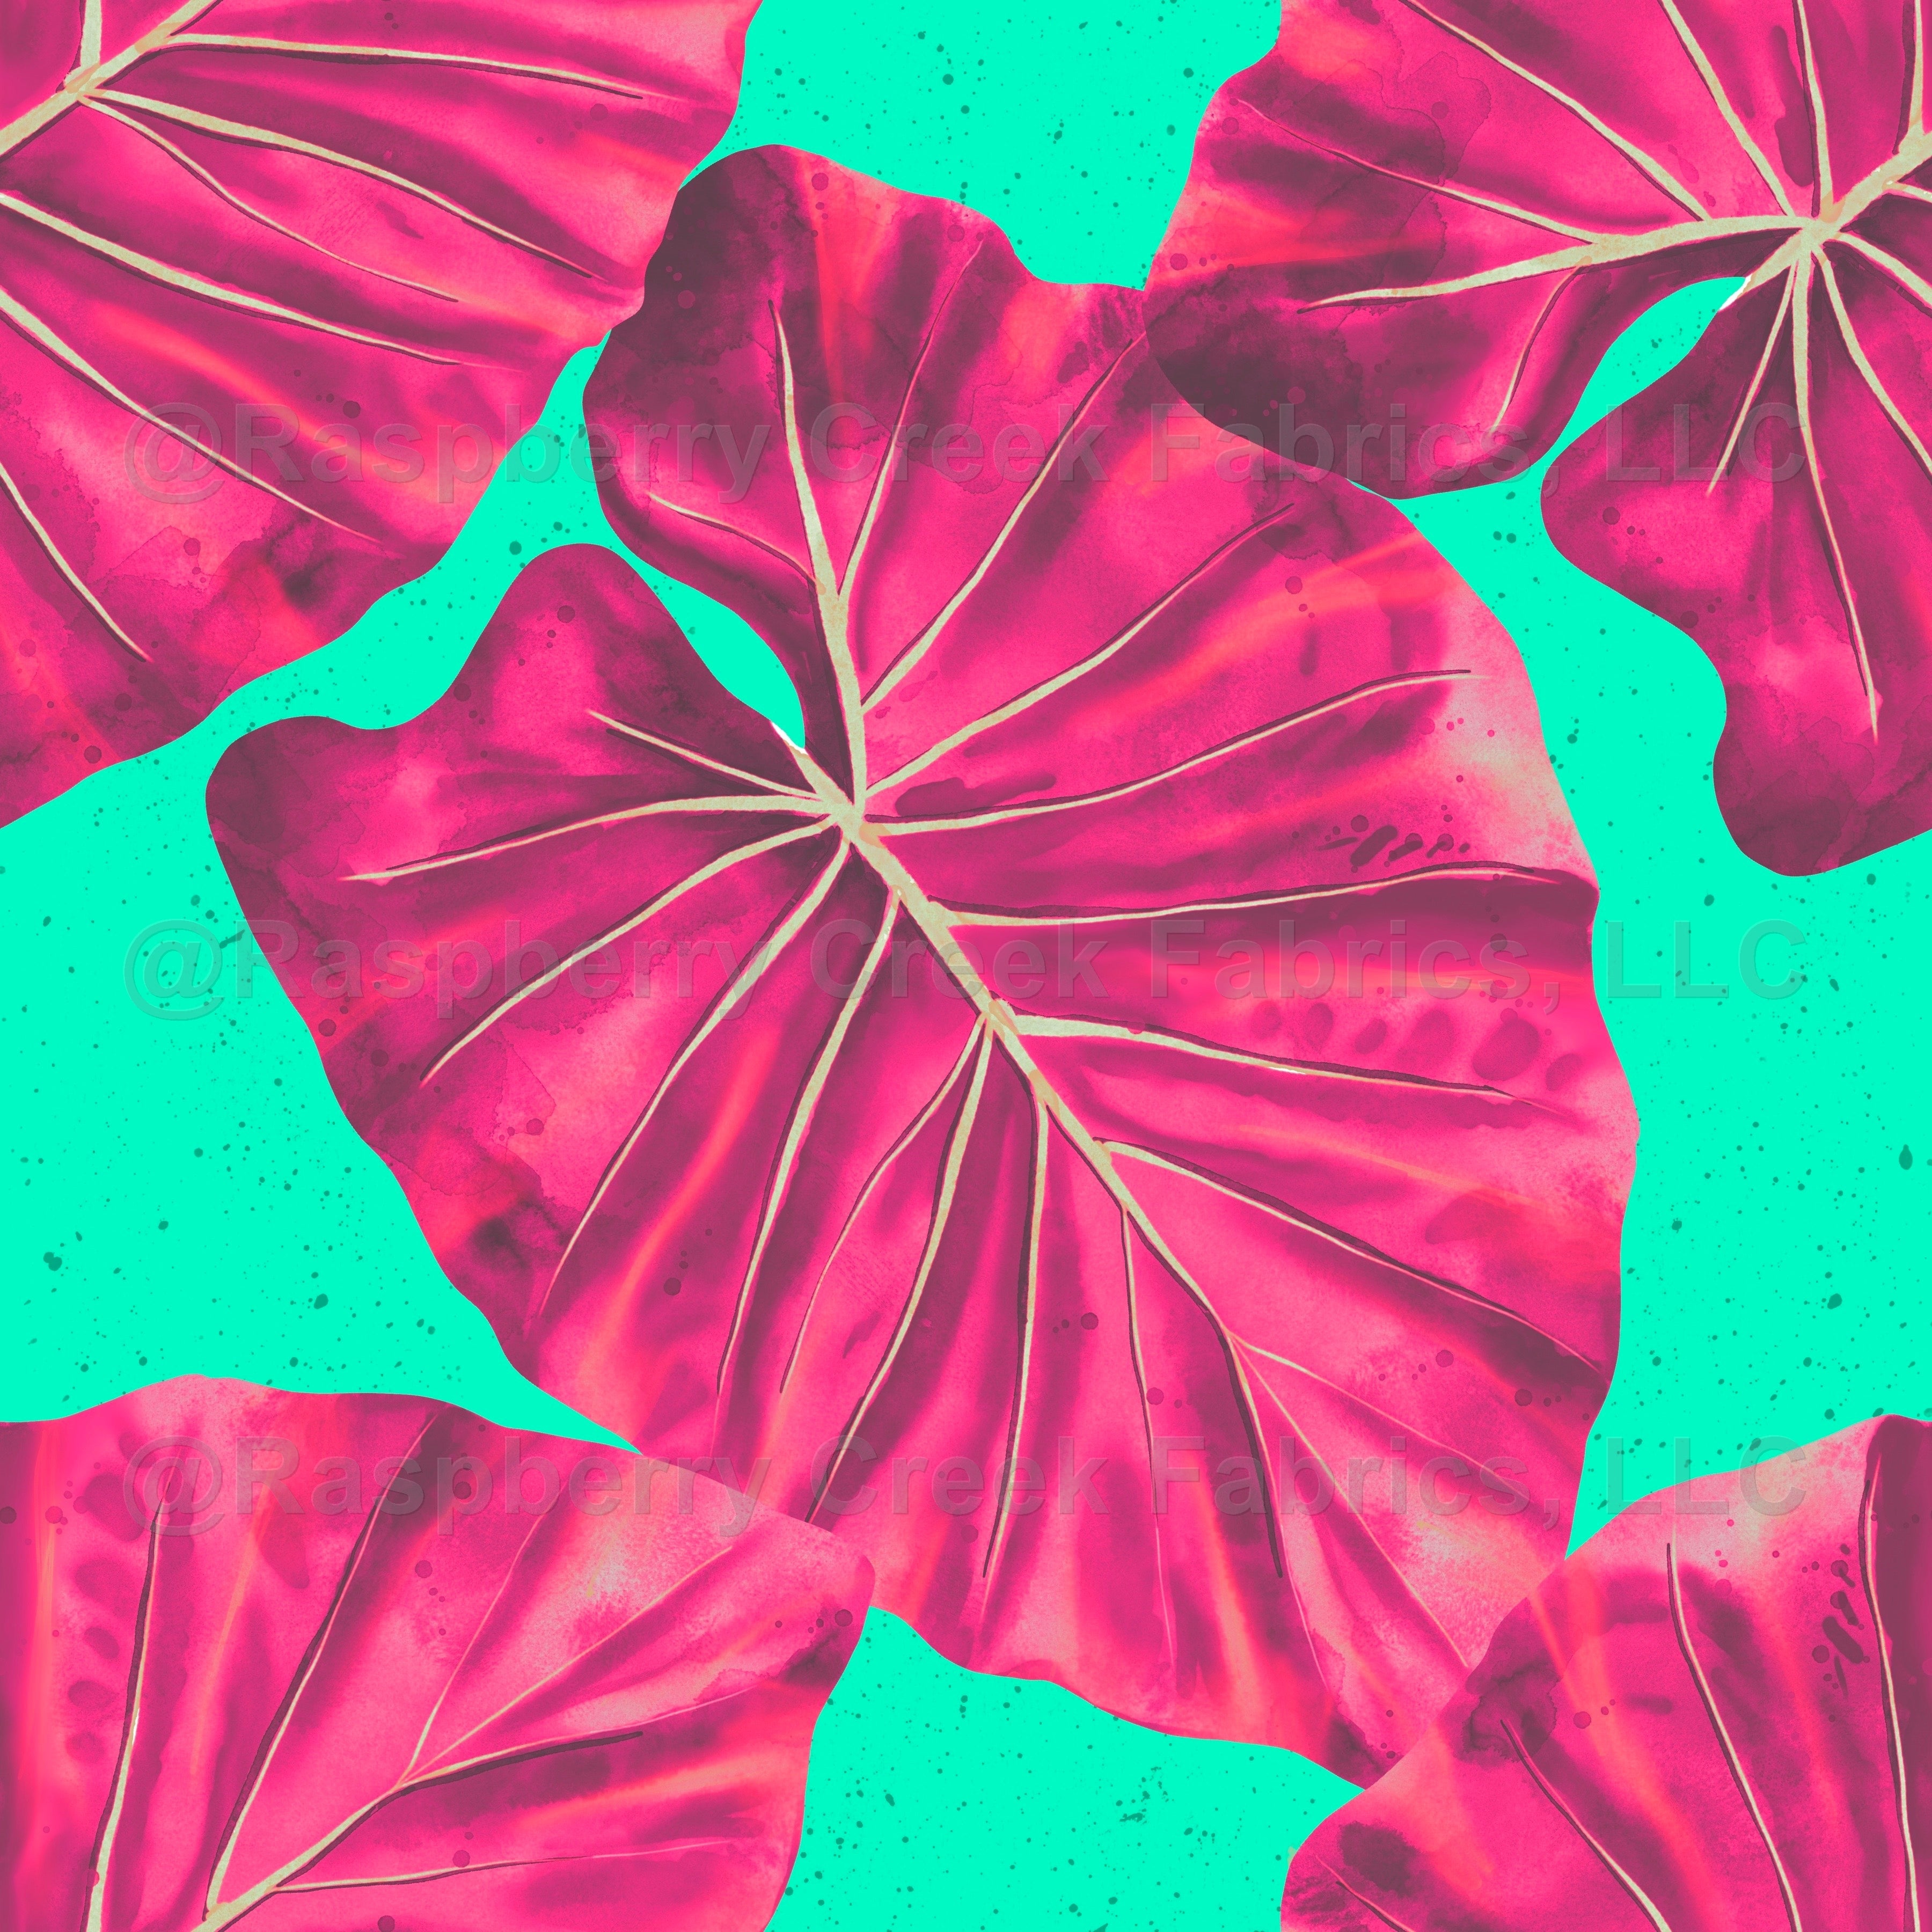 tropical leaves, botanical, boho, bright, neon, turquoise, hot pink, watercolor, plant, leaves, Florida Fabric, Raspberry Creek Fabrics, watermarked